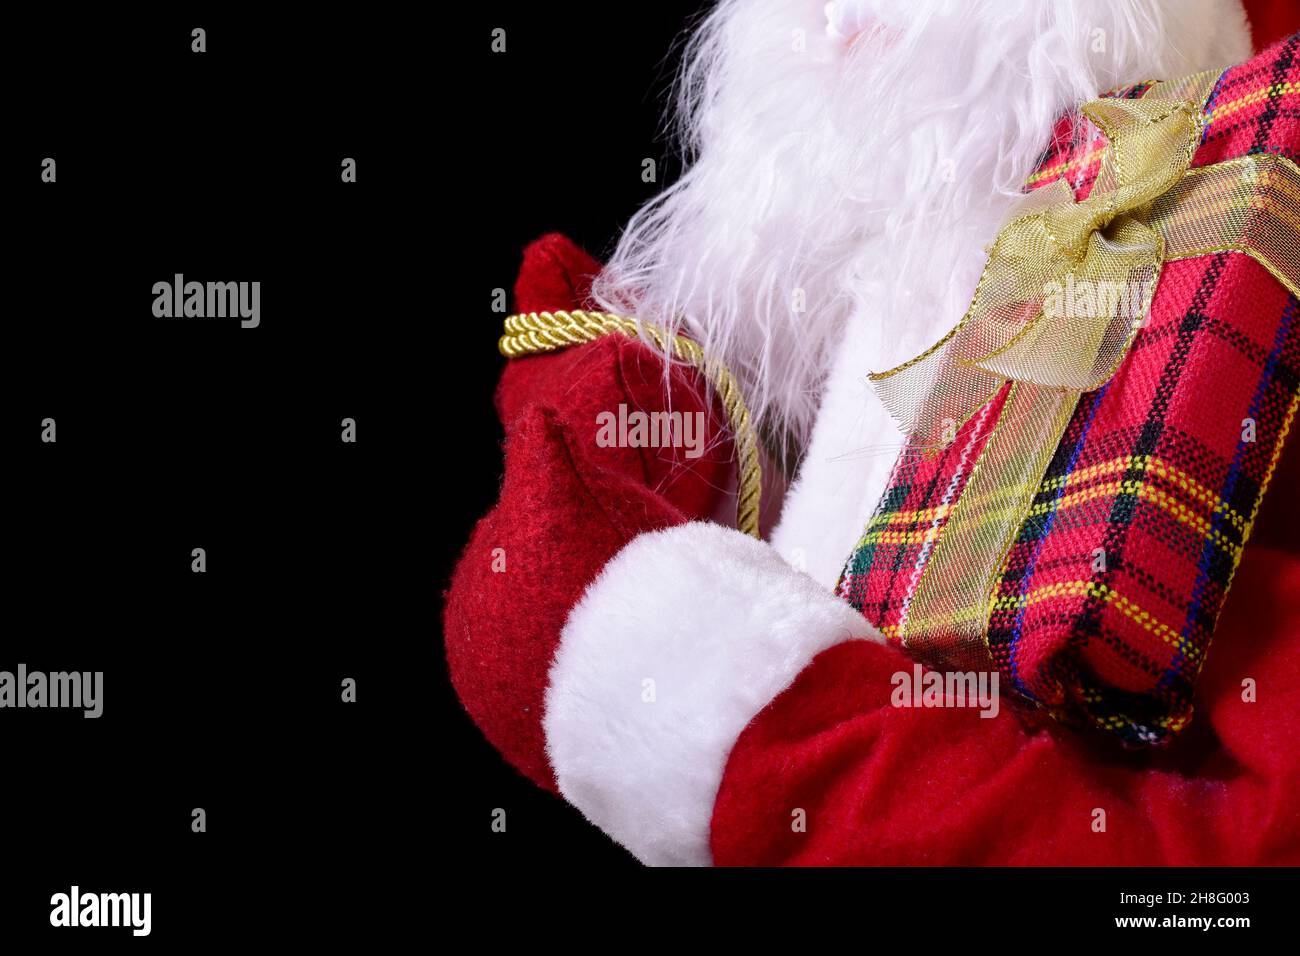 Photograph of a red gift package on Santa Claus's arm. The photo has a large copy space and a black background. Stock Photo